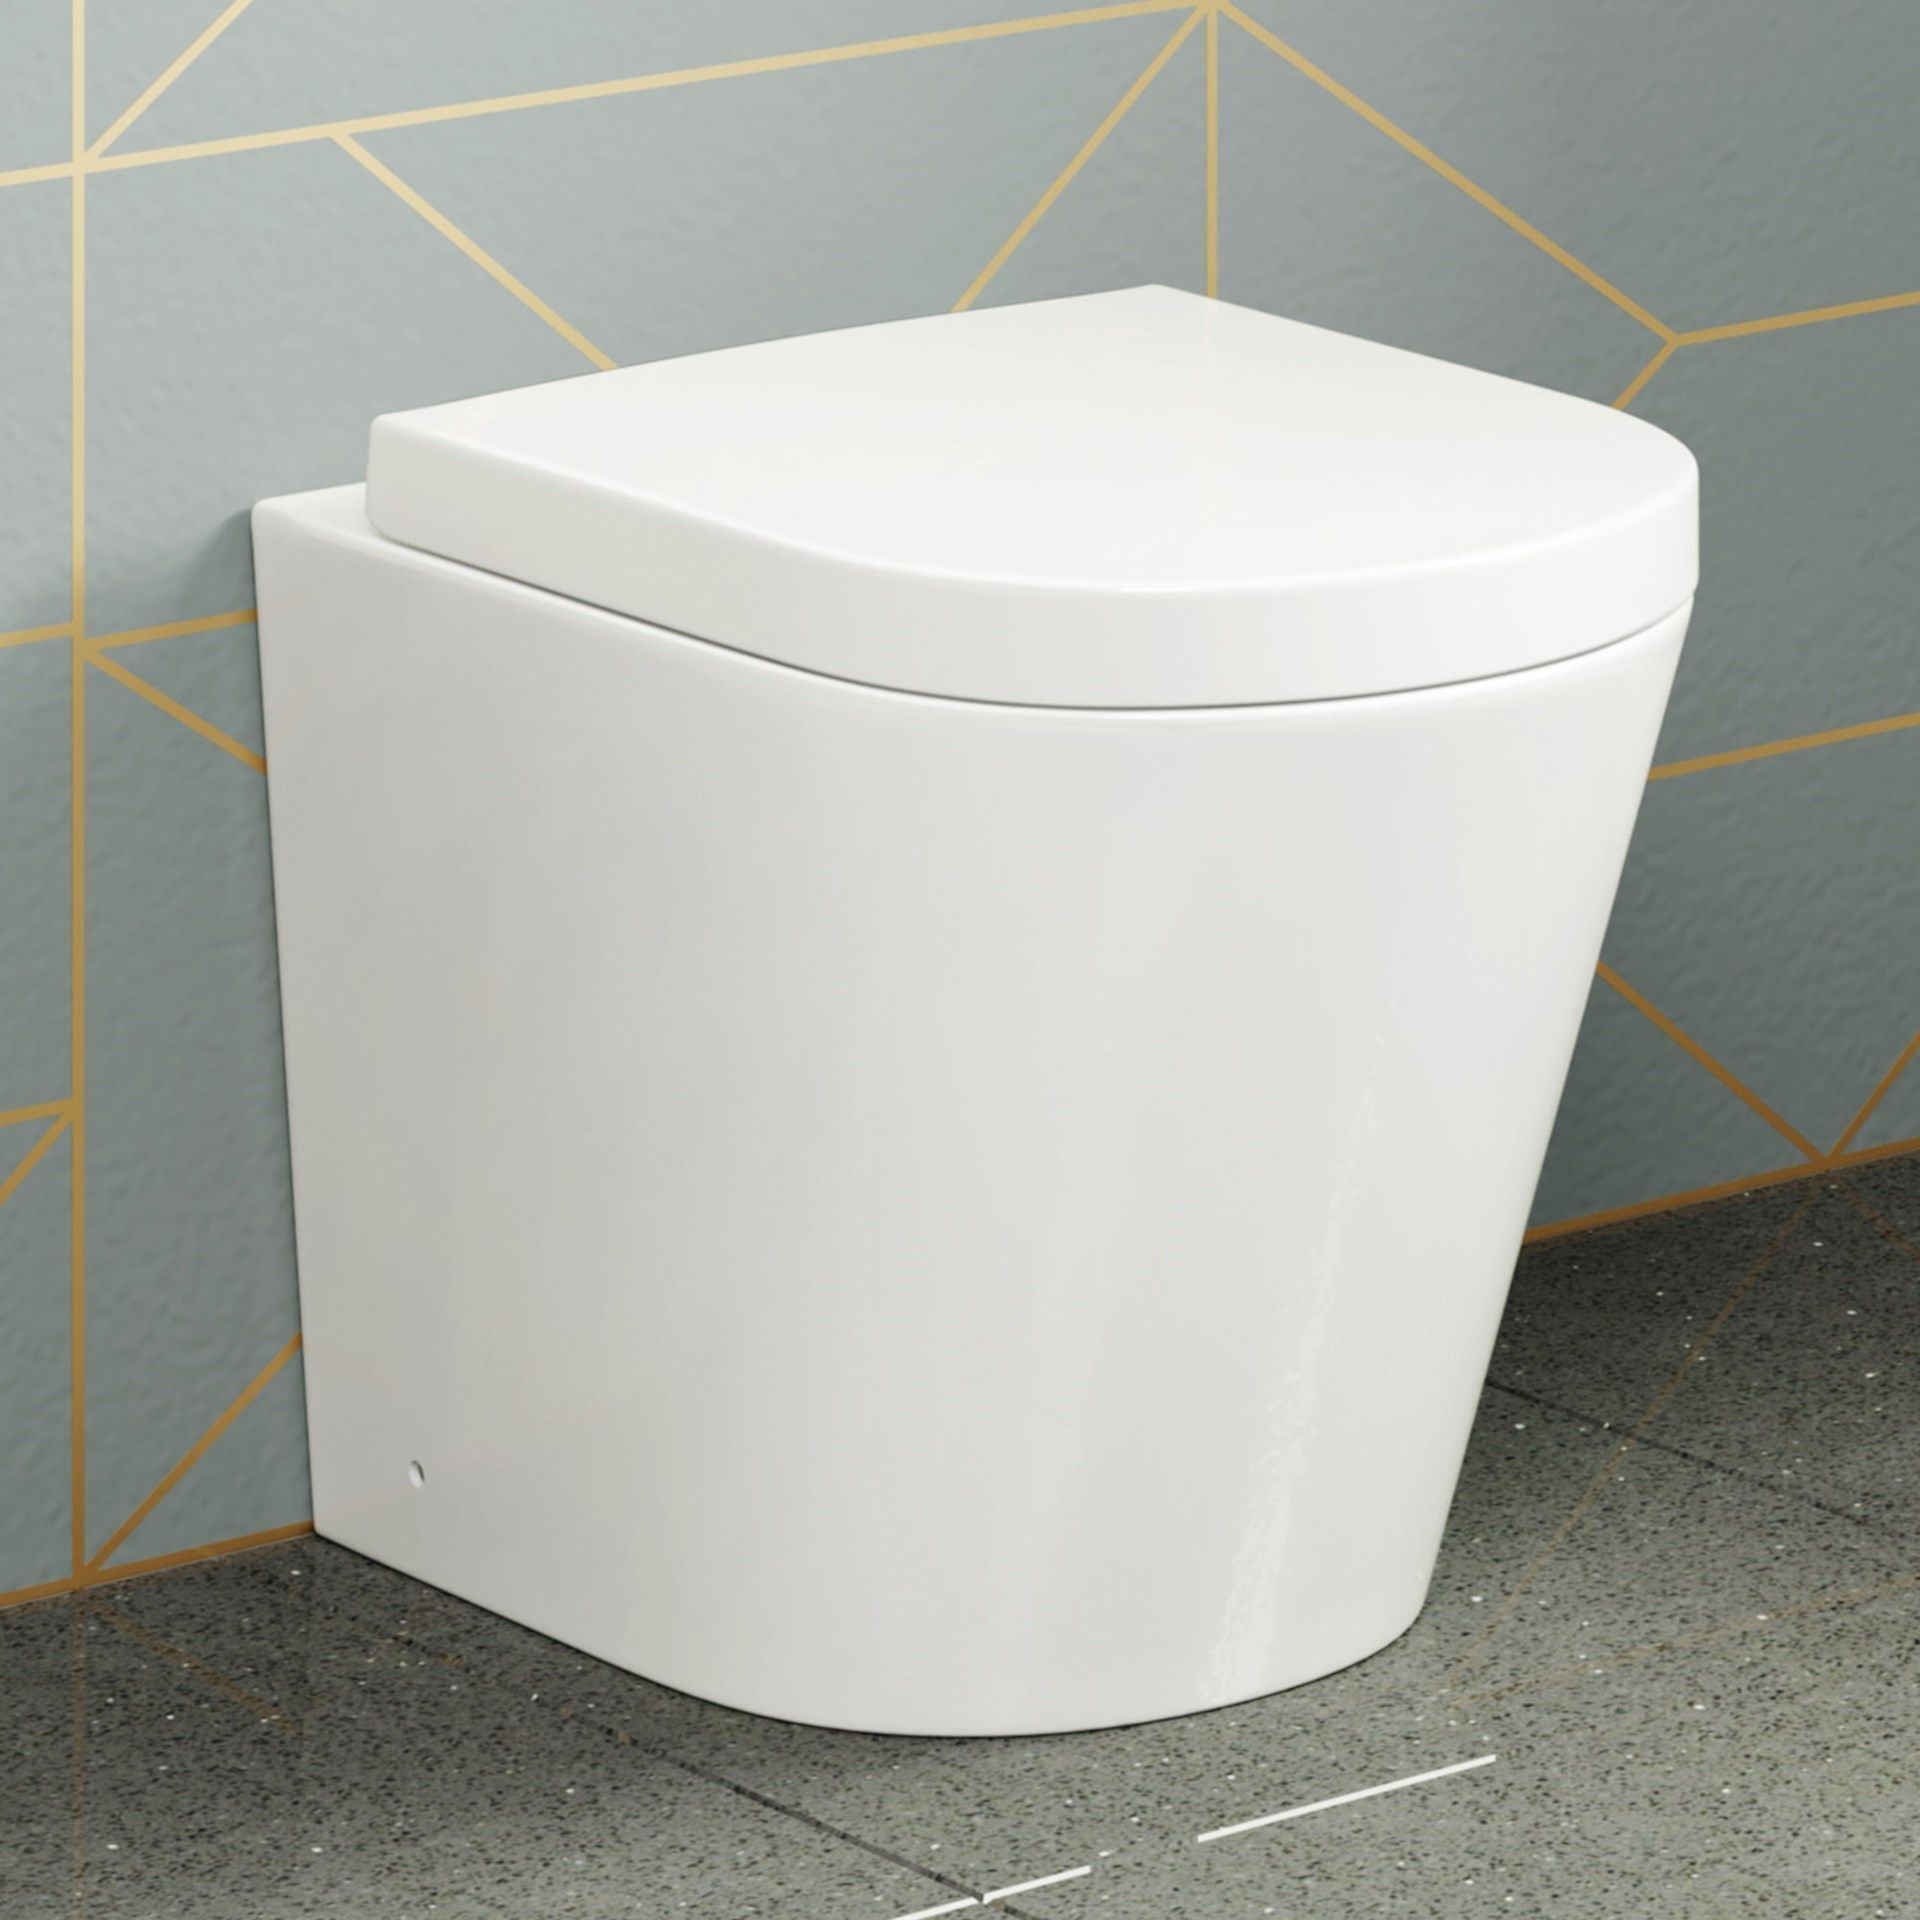 New & Boxed Lyon Back To Wall Toilet With Soft Close Seat.RRP £349.99 Each.Our Lyon Back To Wall